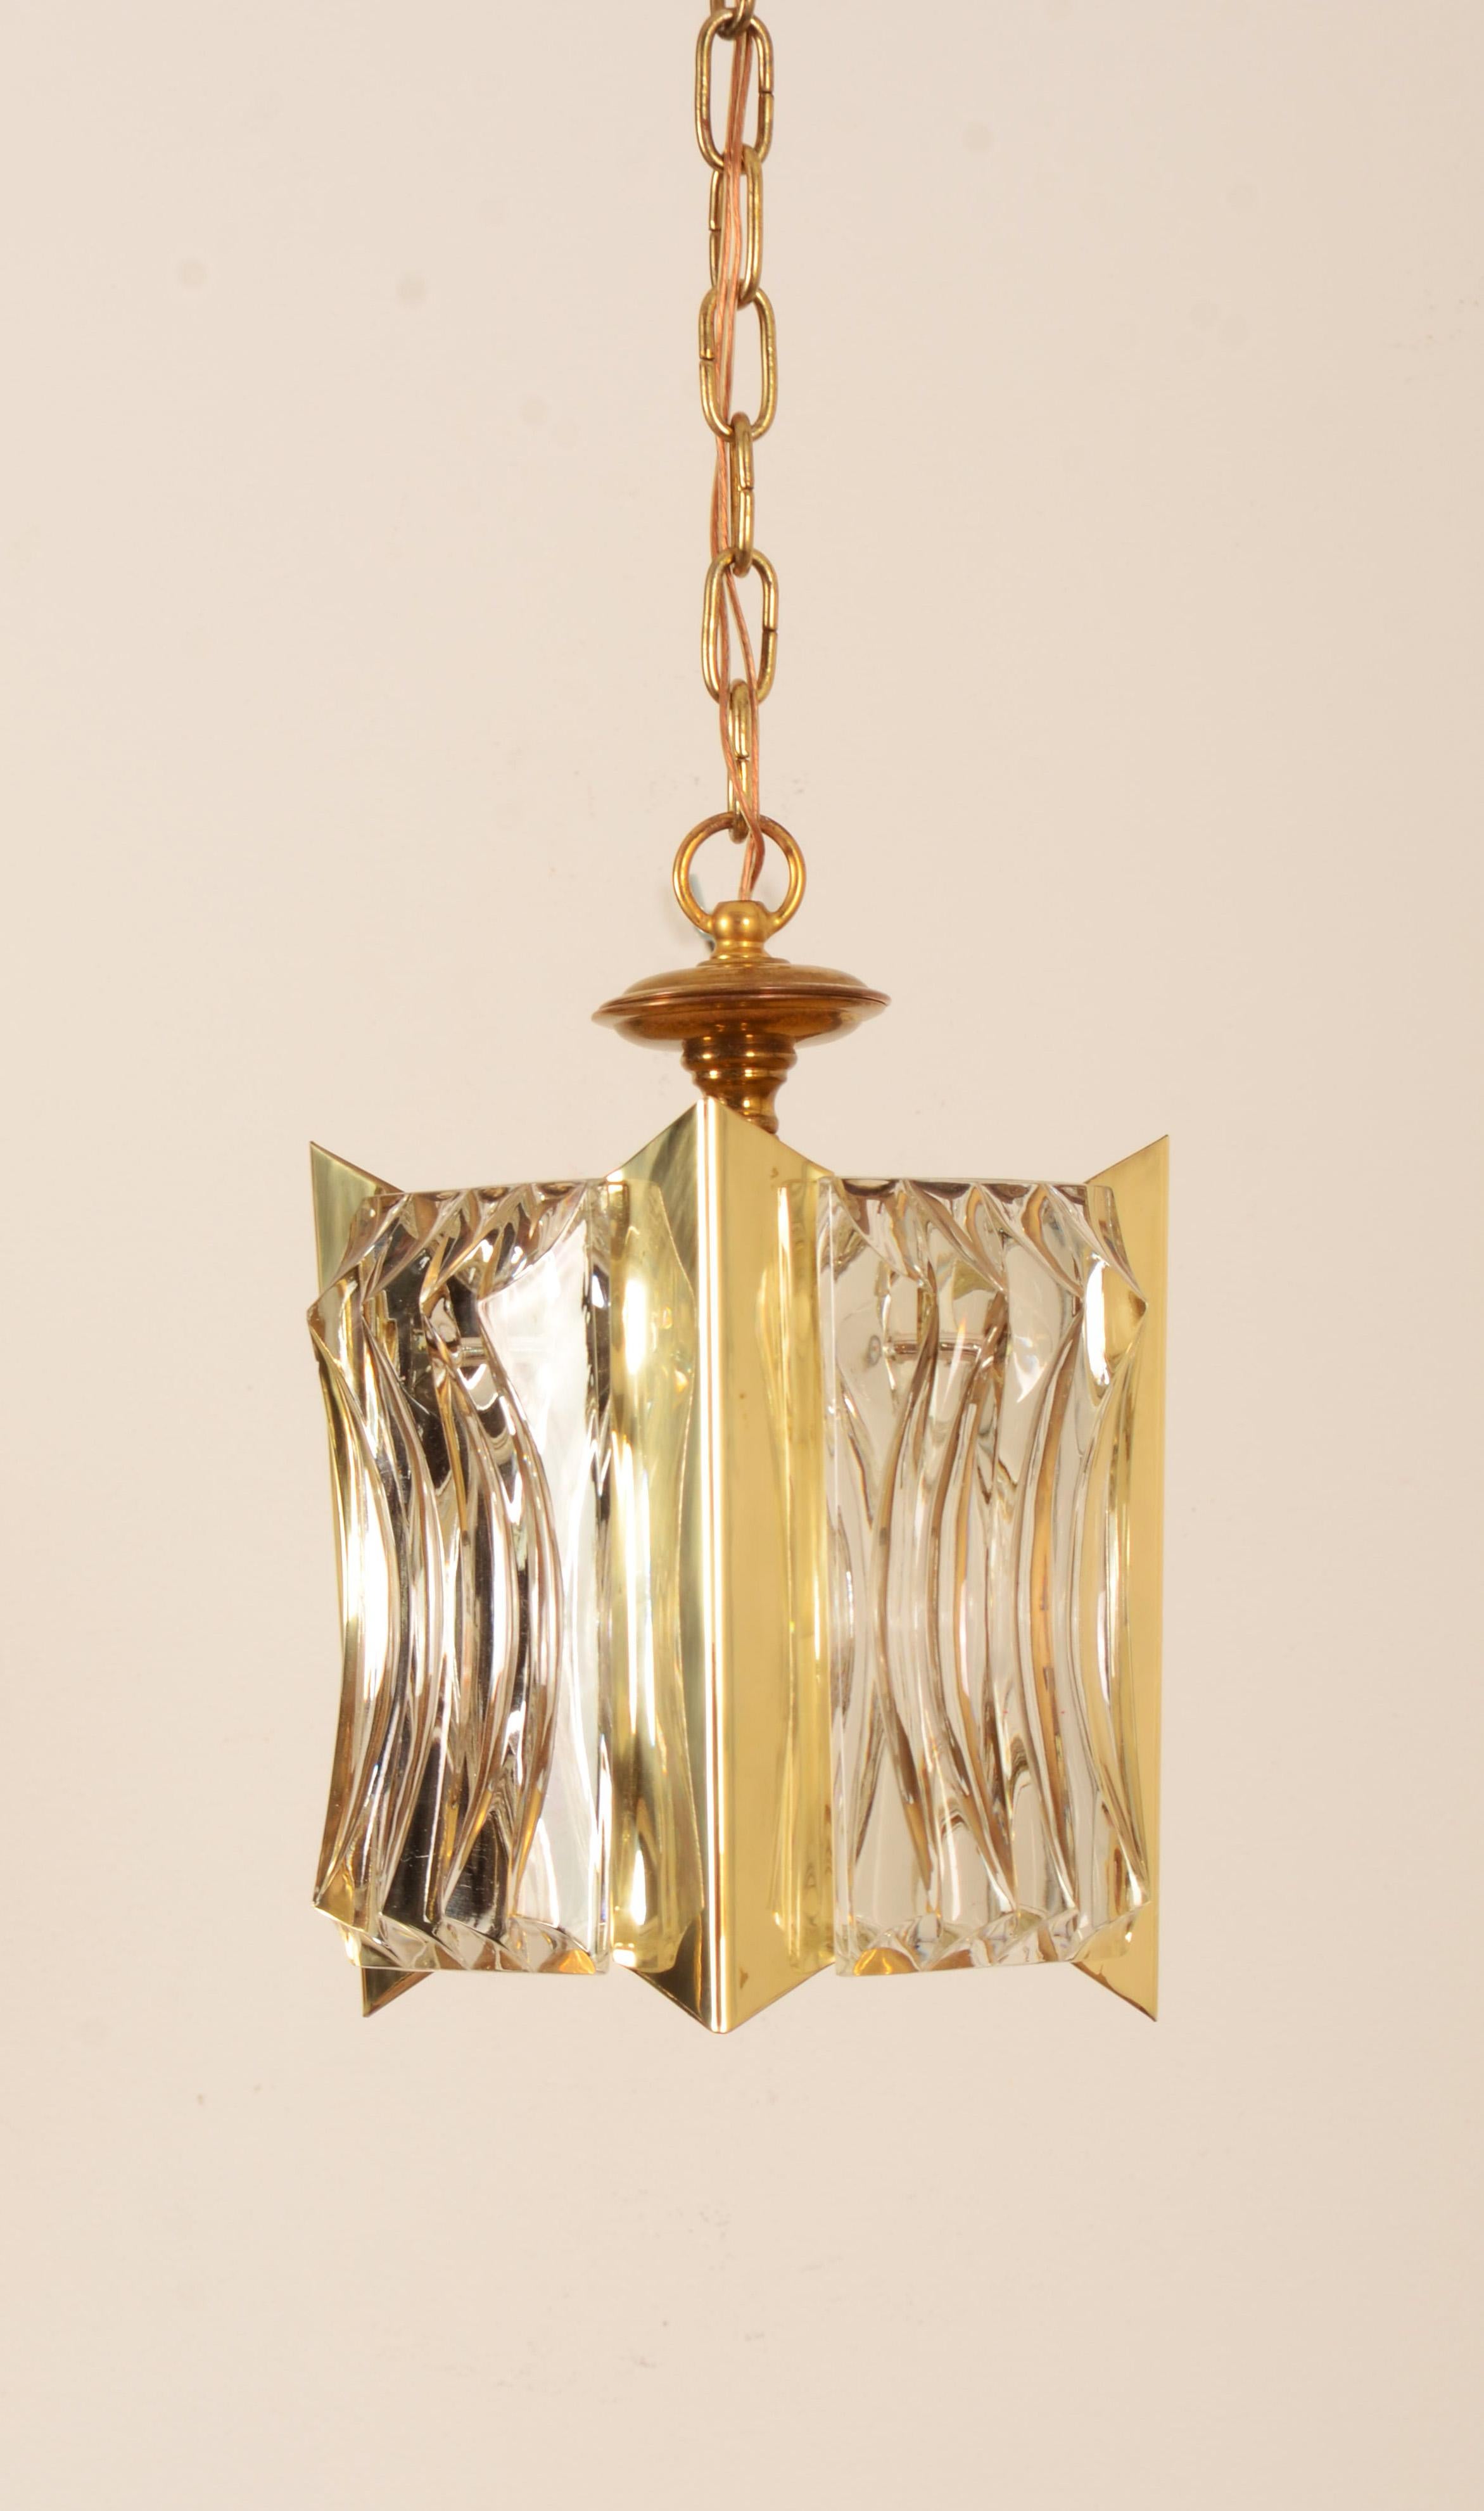 Polished brass frame with a pressed glass shade, fitted with one porcelain E27 socket up to 100W. Manufactured in the late 1960s by Boréns, Borås, Sweden.